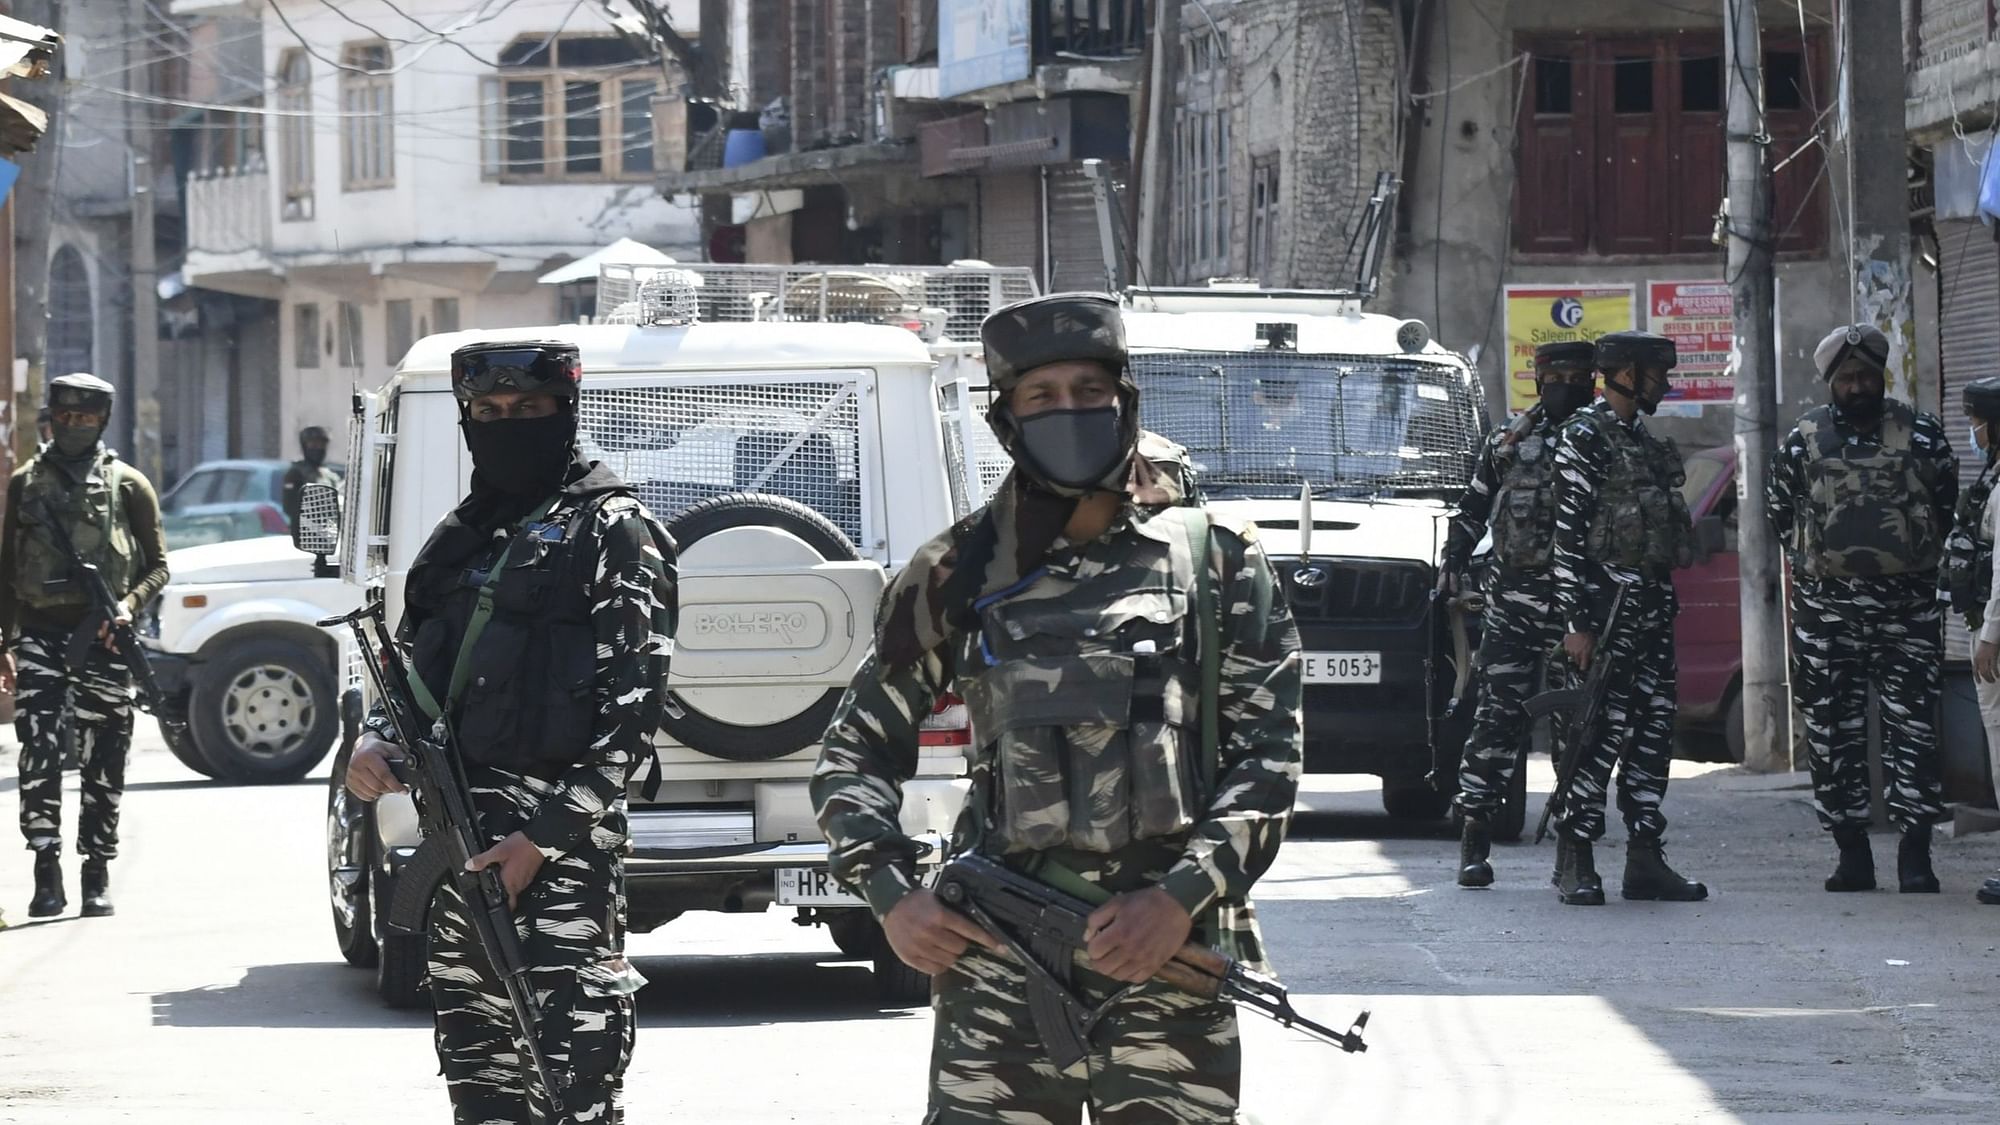 Security forces in Kashmir on Tuesday, 19 May gunned down two Hizbul Mujahideen terrorists in Srinagar, including its top commander Junaid Sehrai.